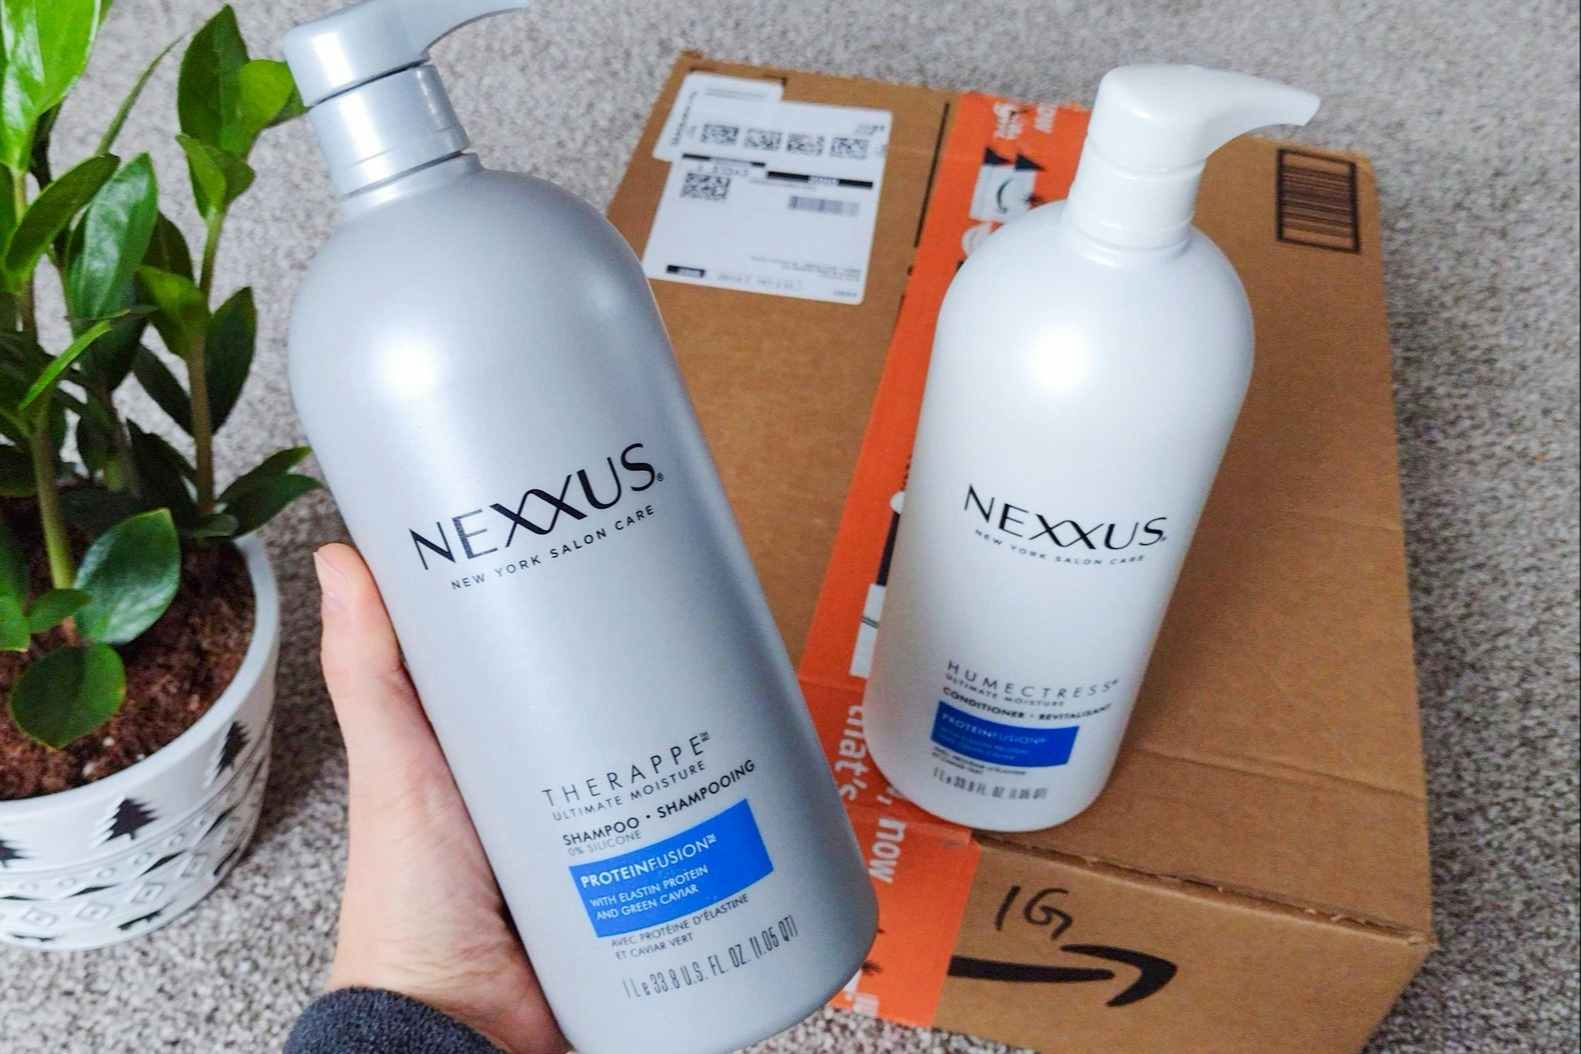 Nexxus Hair Care Sale: Deals as Low as $8.37 on Amazon